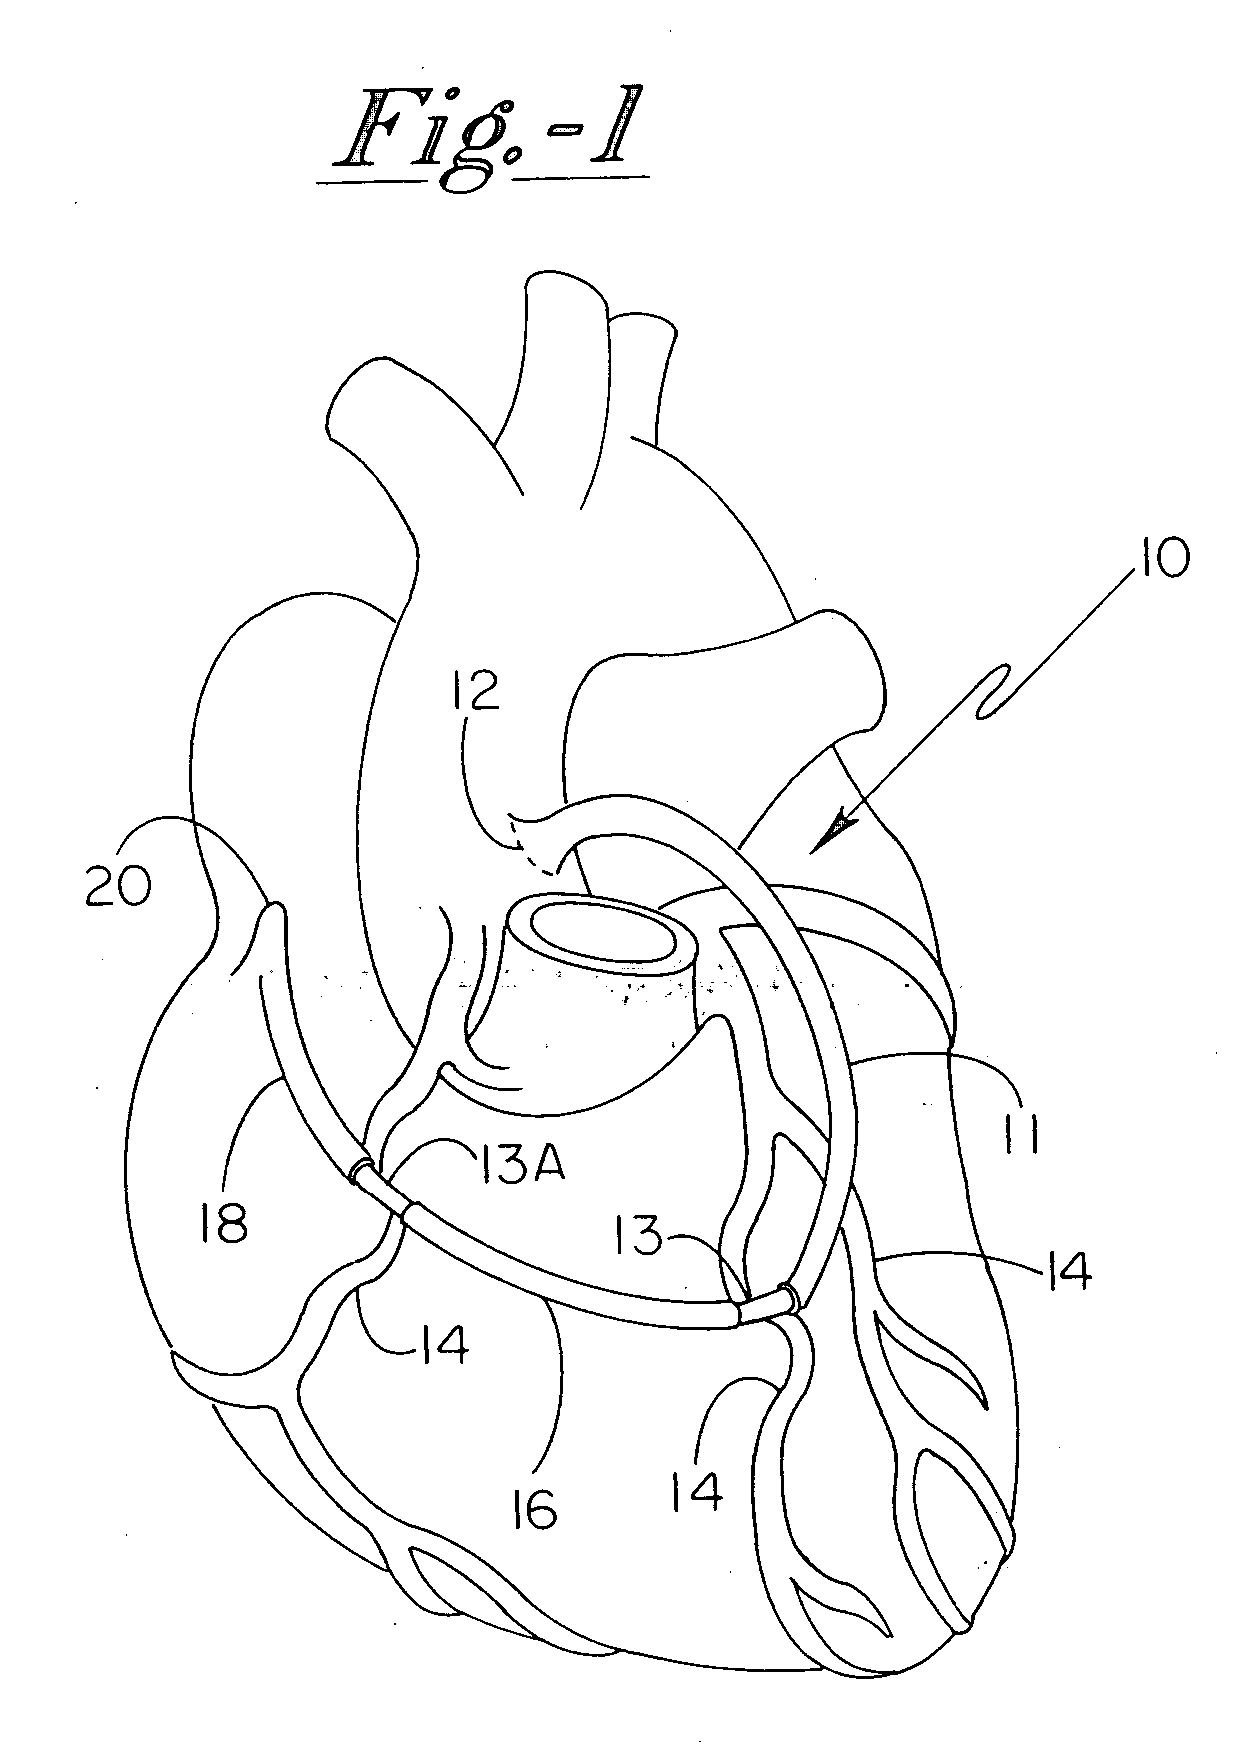 Grafted network incorporating a multiple channel fluid flow connector